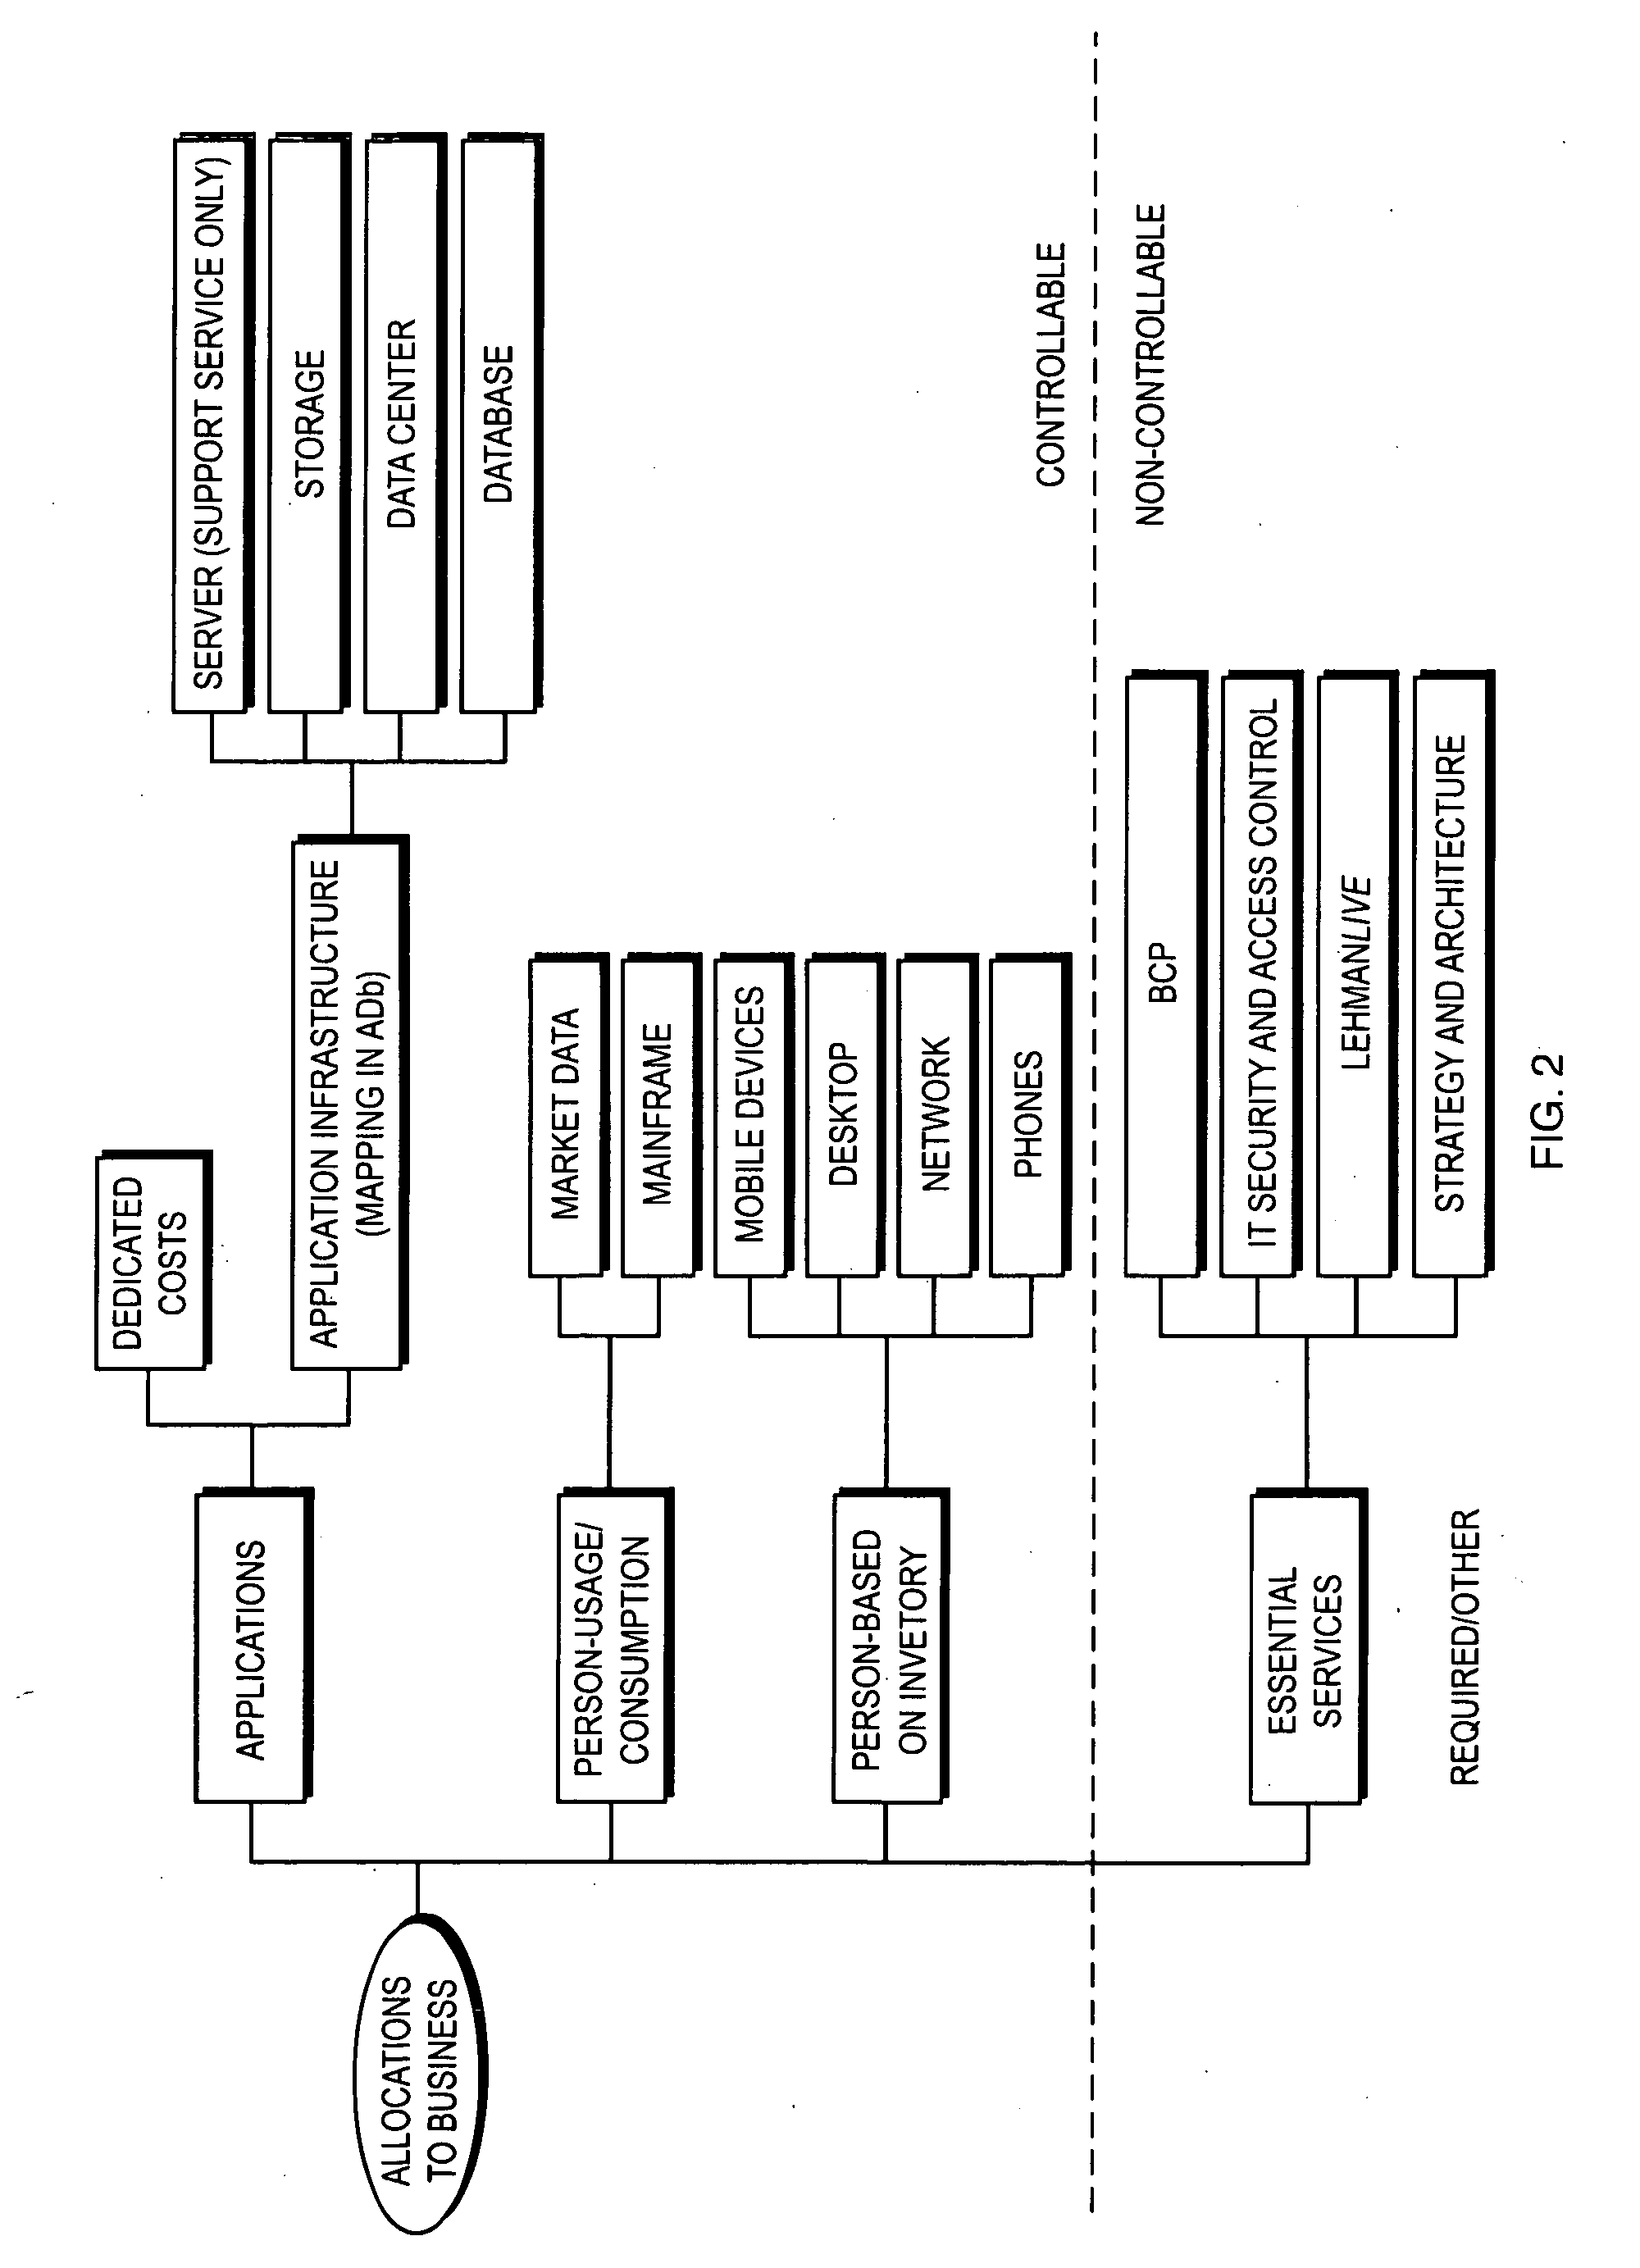 System and method for providing cost transparency to units of an organization